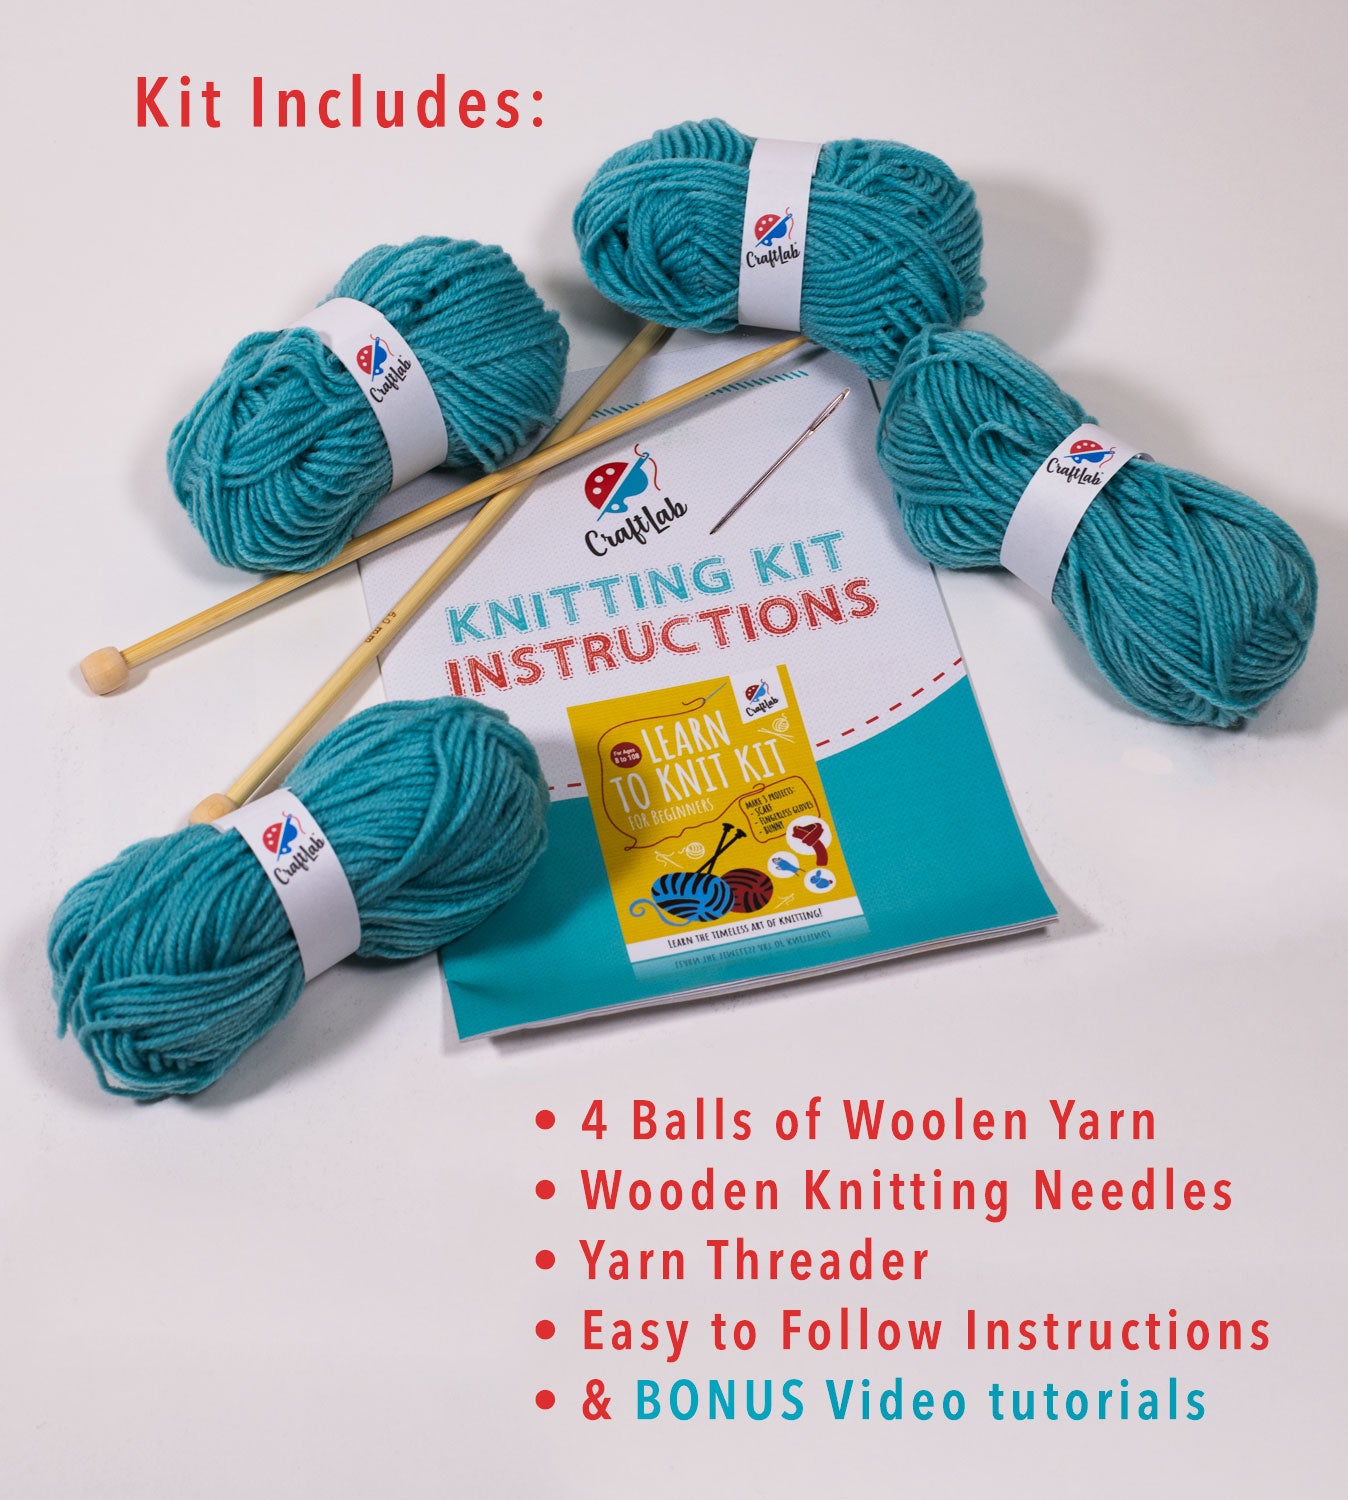 Starter Craft Kit: Learn to knit